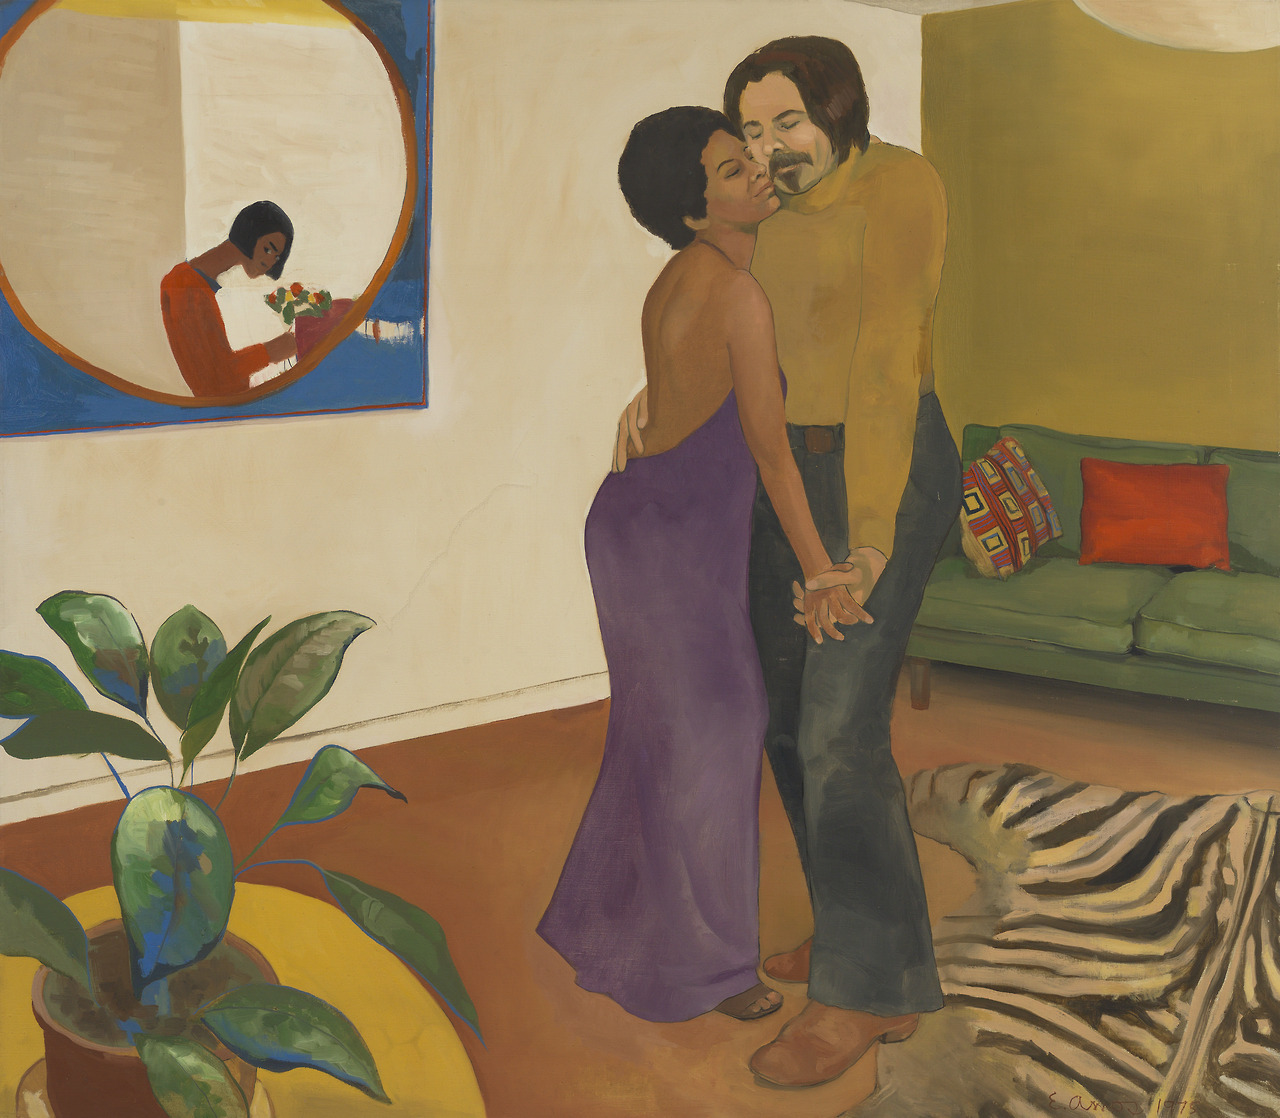 Emma Amos, Sandy and Her Husband, 1973, The Cleveland Museum of Art, Cleveland, OH, USA.